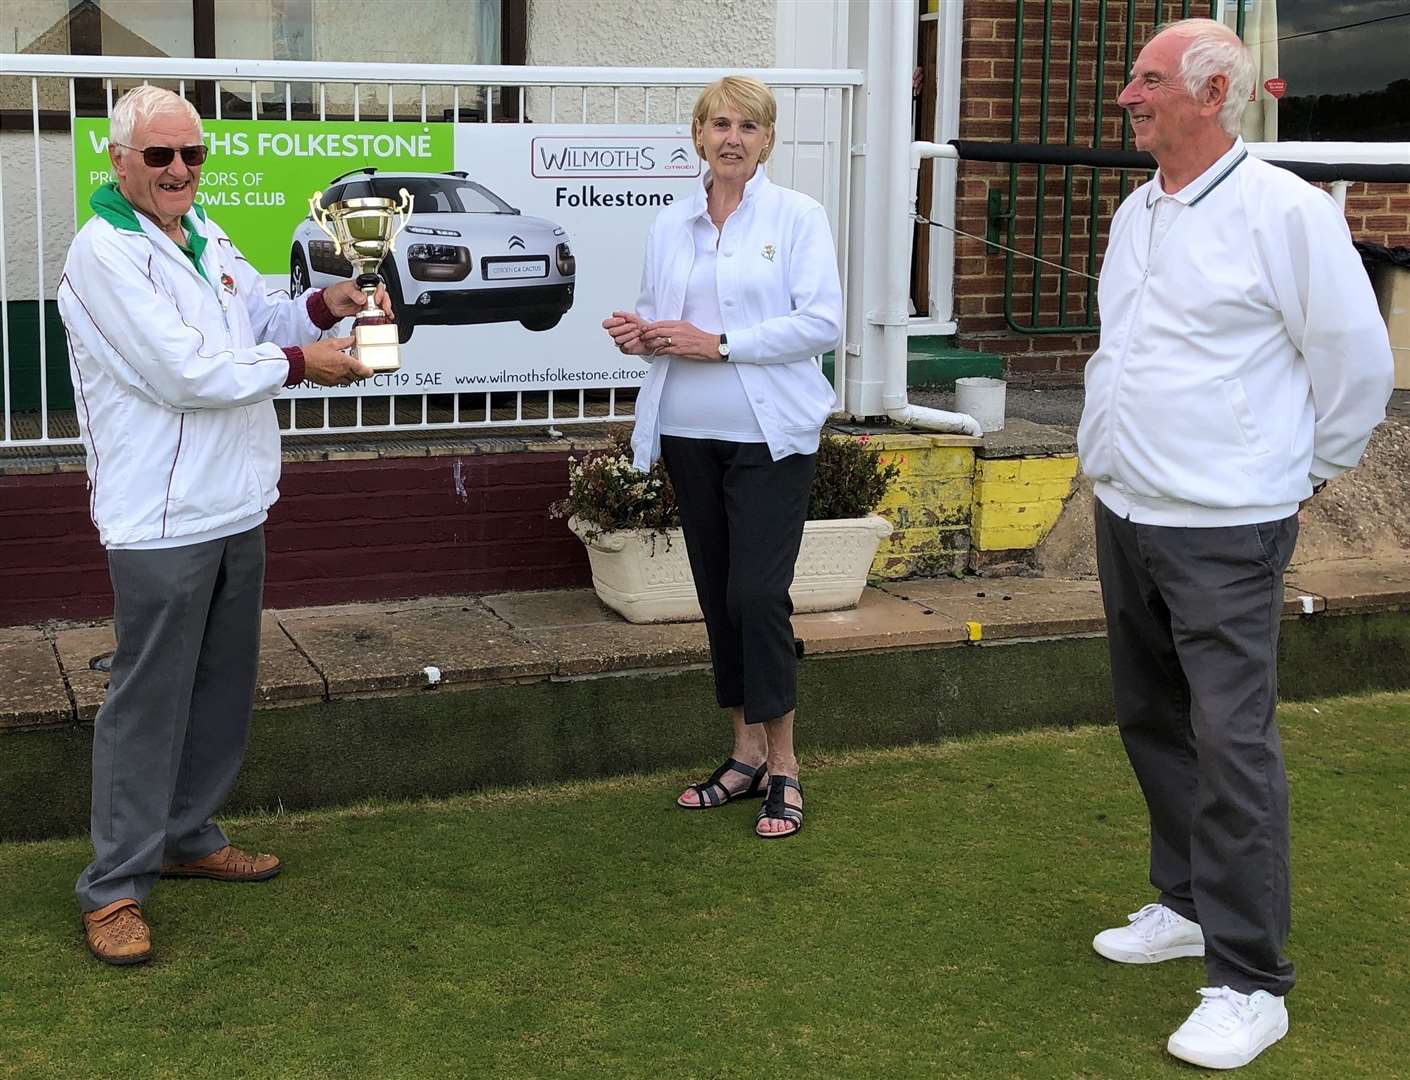 Cheriton Bowls Club's President Hugh Coleman presents the Wilmoths Trophy to Ann Russell and John Gleeson. (42110982)